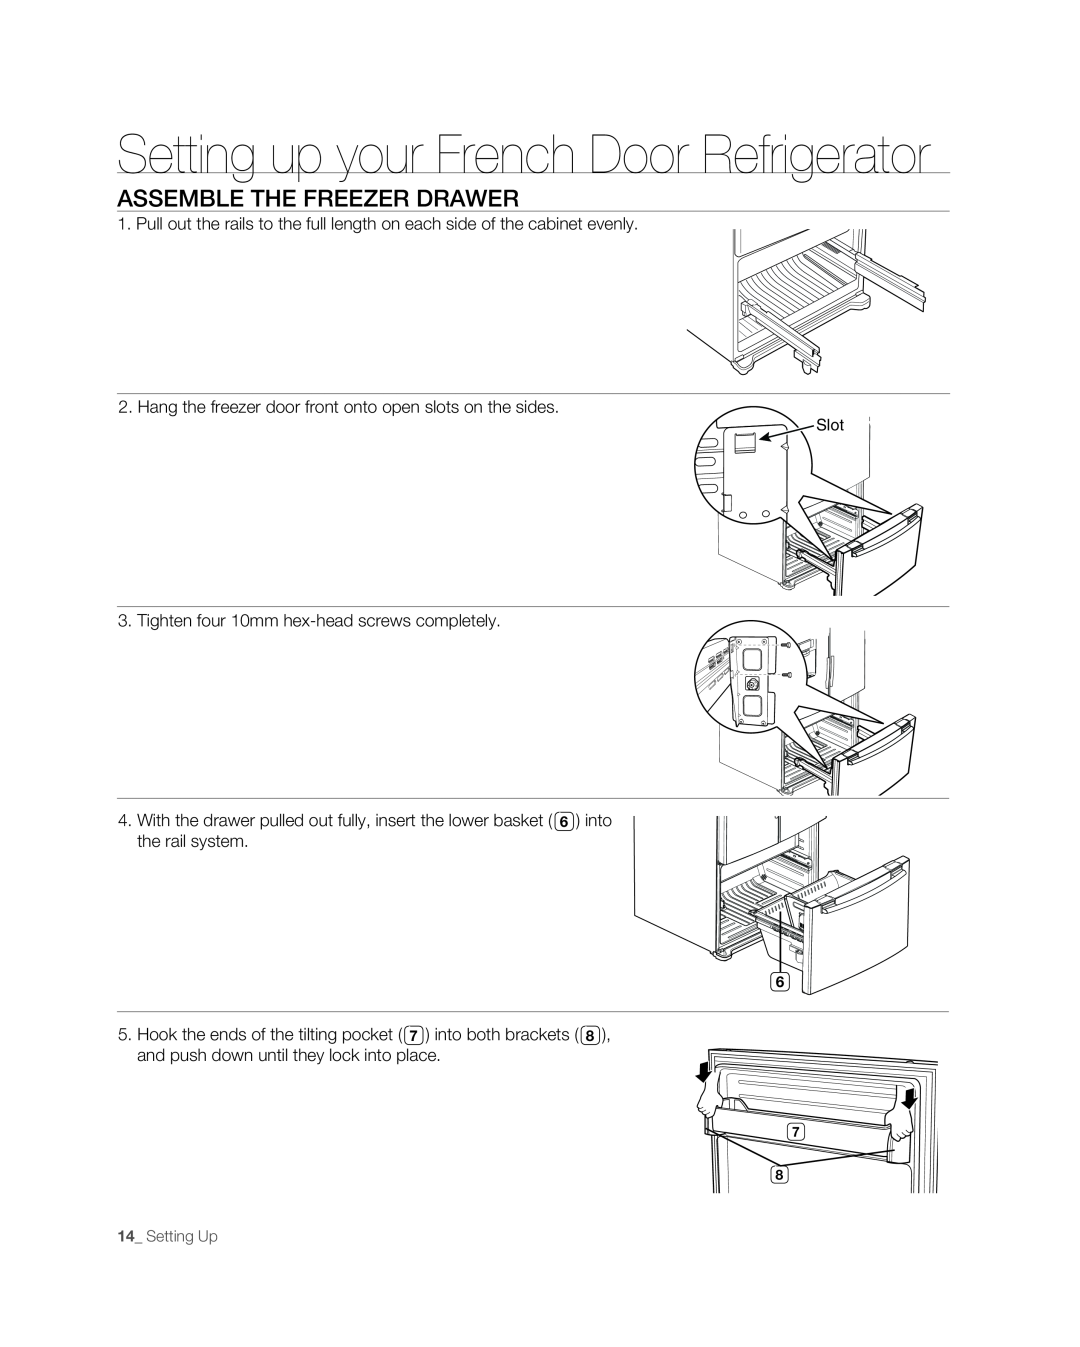 Samsung RF267ABPN user manual assemble the freezer drawer, Setting up your French Door Refrigerator 